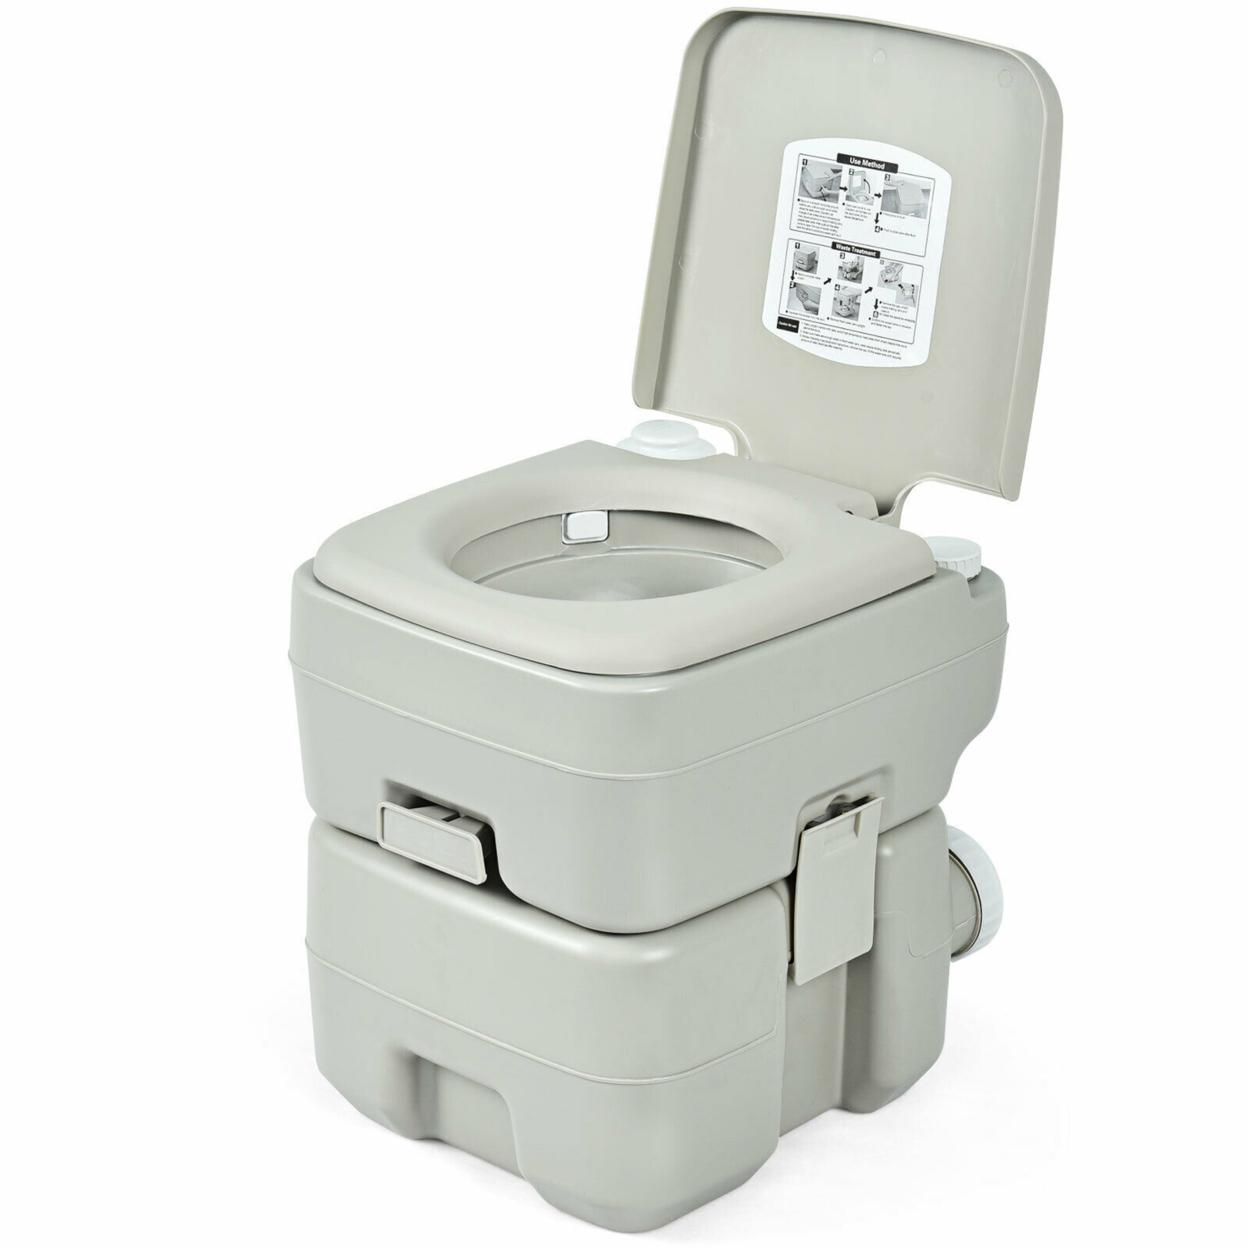 5.3 Gallon 20L Portable Travel Toilet Camping RV Indoor Outdoor Potty Commode